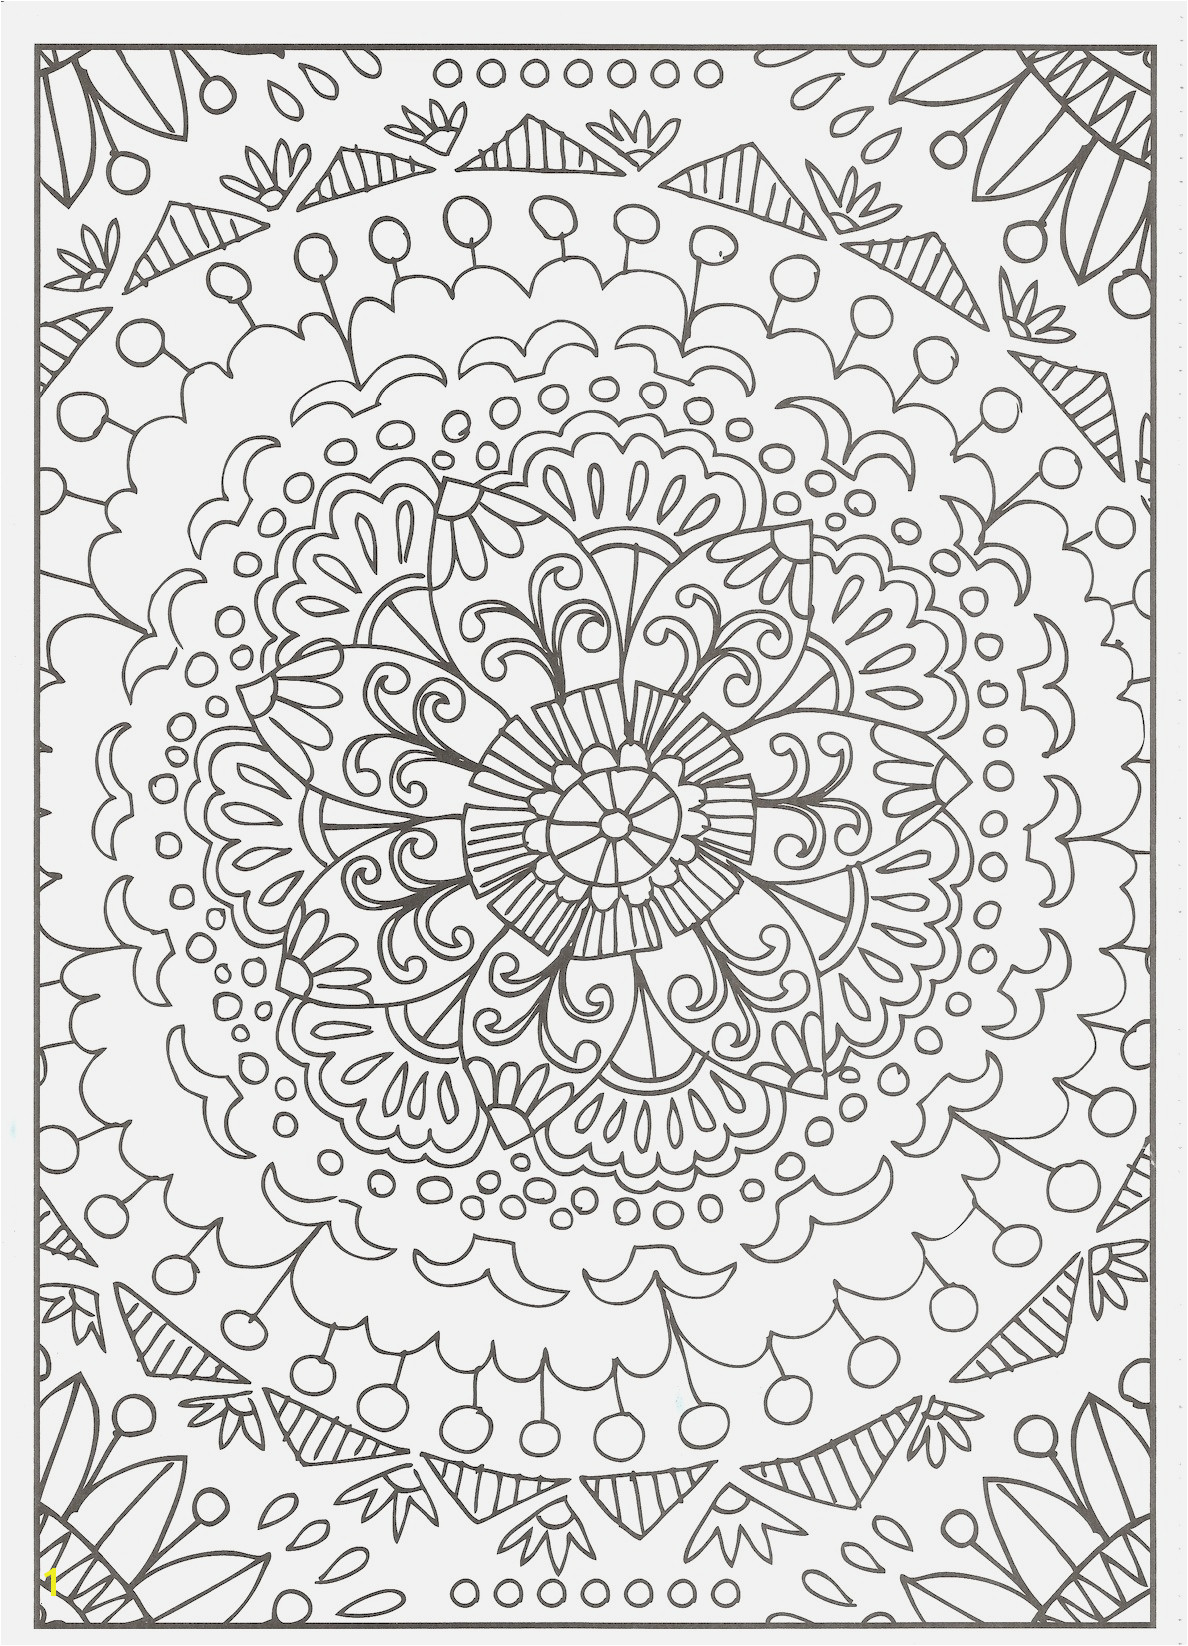 Coloring Pages Free for Adults Awesome Coloring Books for Adults Easy and Fun Free Dog Coloring